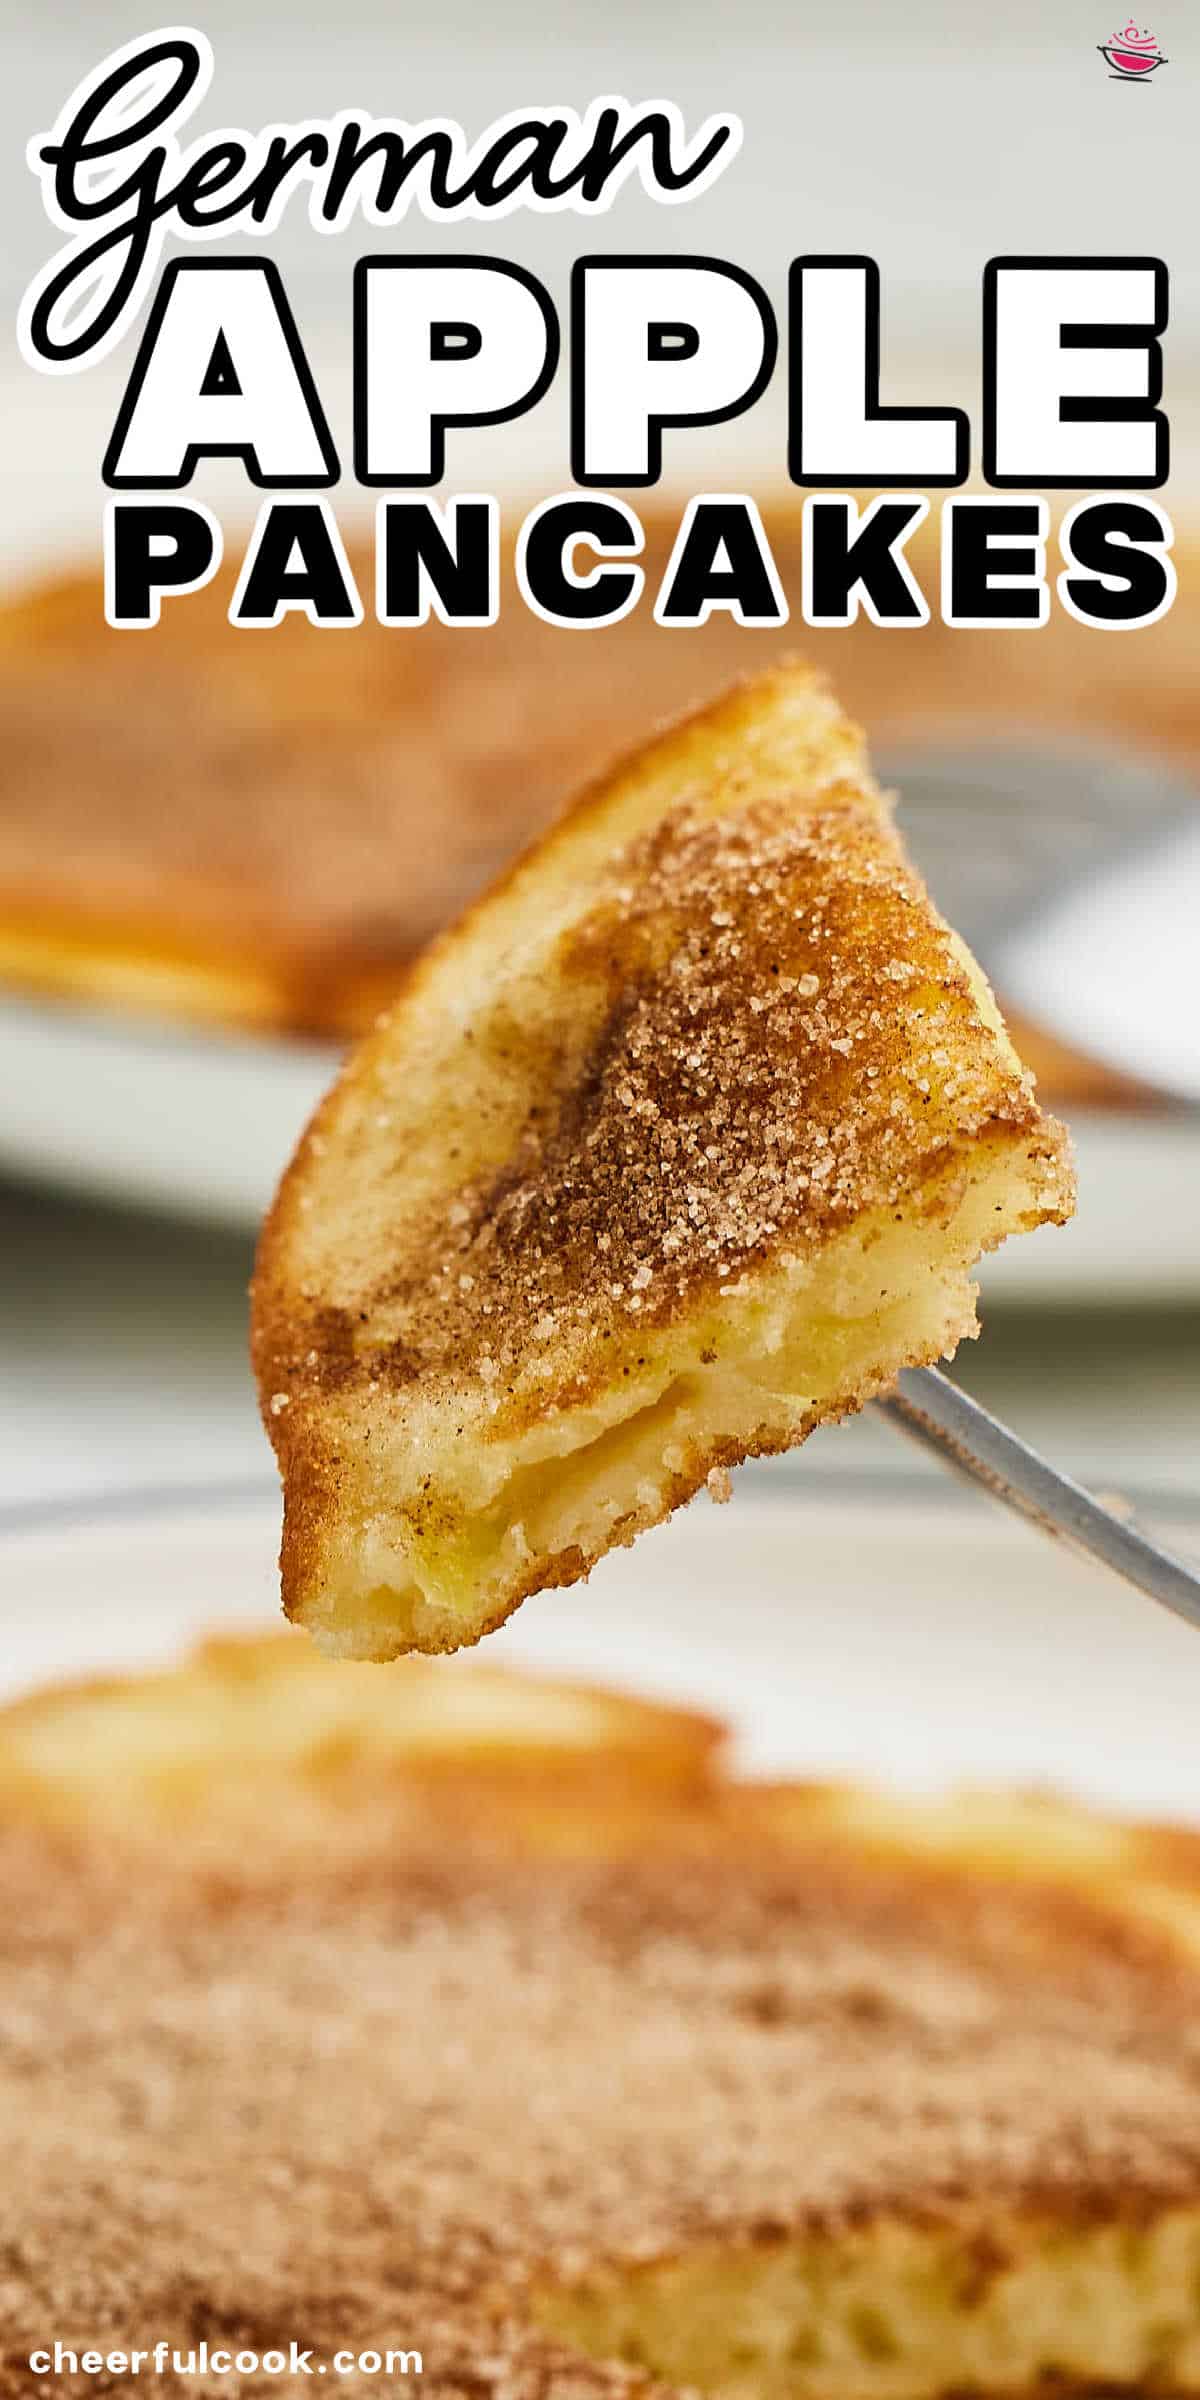 'Apfelpfannkuchen' are traditional German apple pancakes that are light and airy, filled with tender apples, and drizzled with cinnamon sugar. #cheerfulcook #apfelpfannkuchen #breakfast #pancakes #omas #airy #video ♡ cheerfulcook.com via @cheerfulcook